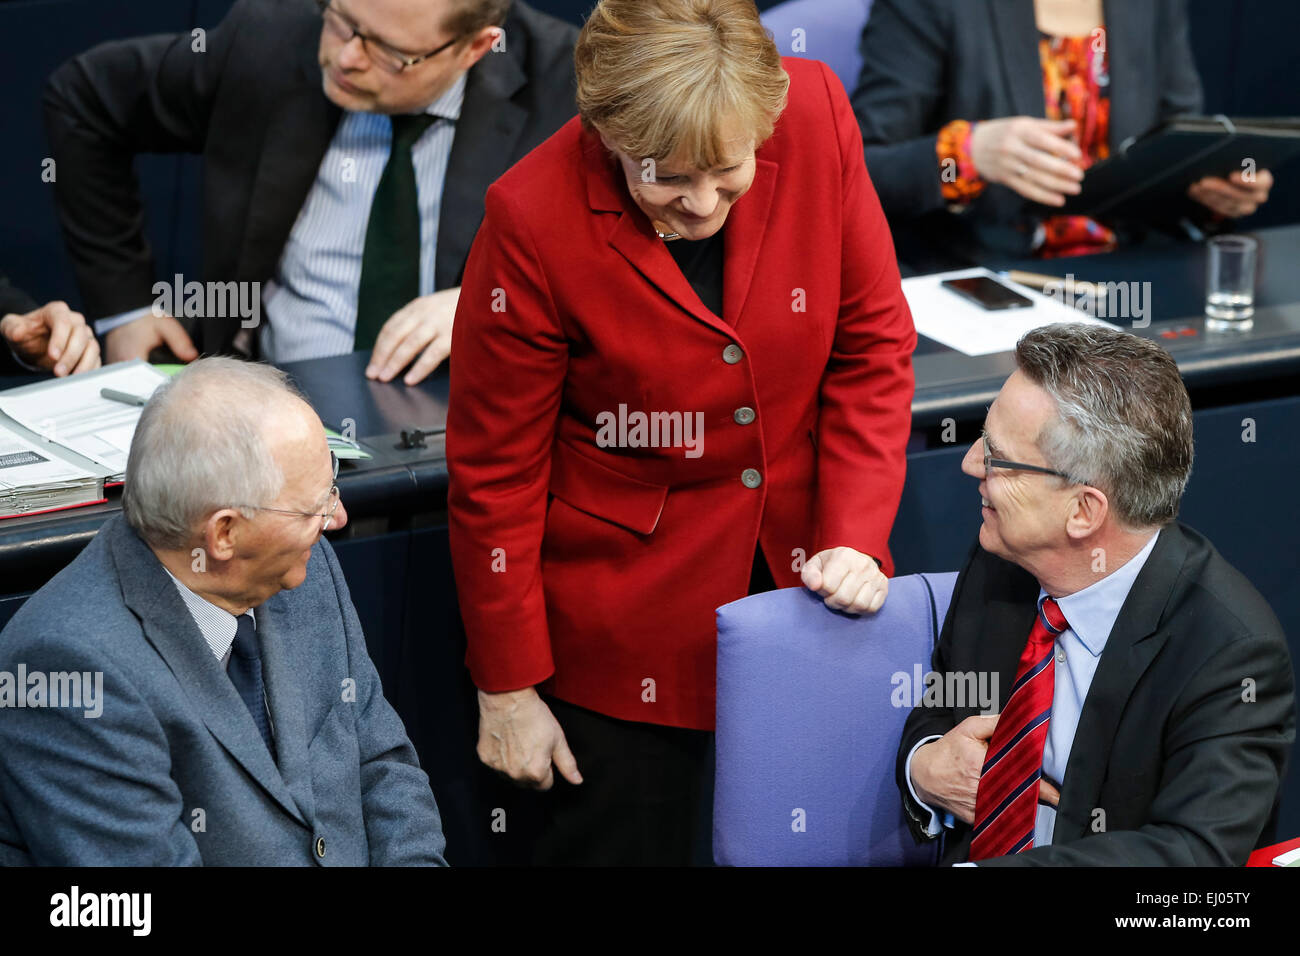 Berlin, Germany. 19th Mar, 2015. Delivery of a governmental declaration by the German Chancellor Angela Merkel in the Bundestag on March 19, 2015 in Berlin, Germany. / Picture: Wolfgang SchŠuble (CDU), German Minister of Finance, (c) Chancellor Angela Merkel (CDU), and Thomas de Maiziere (CDU), German Minister of Interior. Credit:  Reynaldo Chaib Paganelli/Alamy Live News Stock Photo